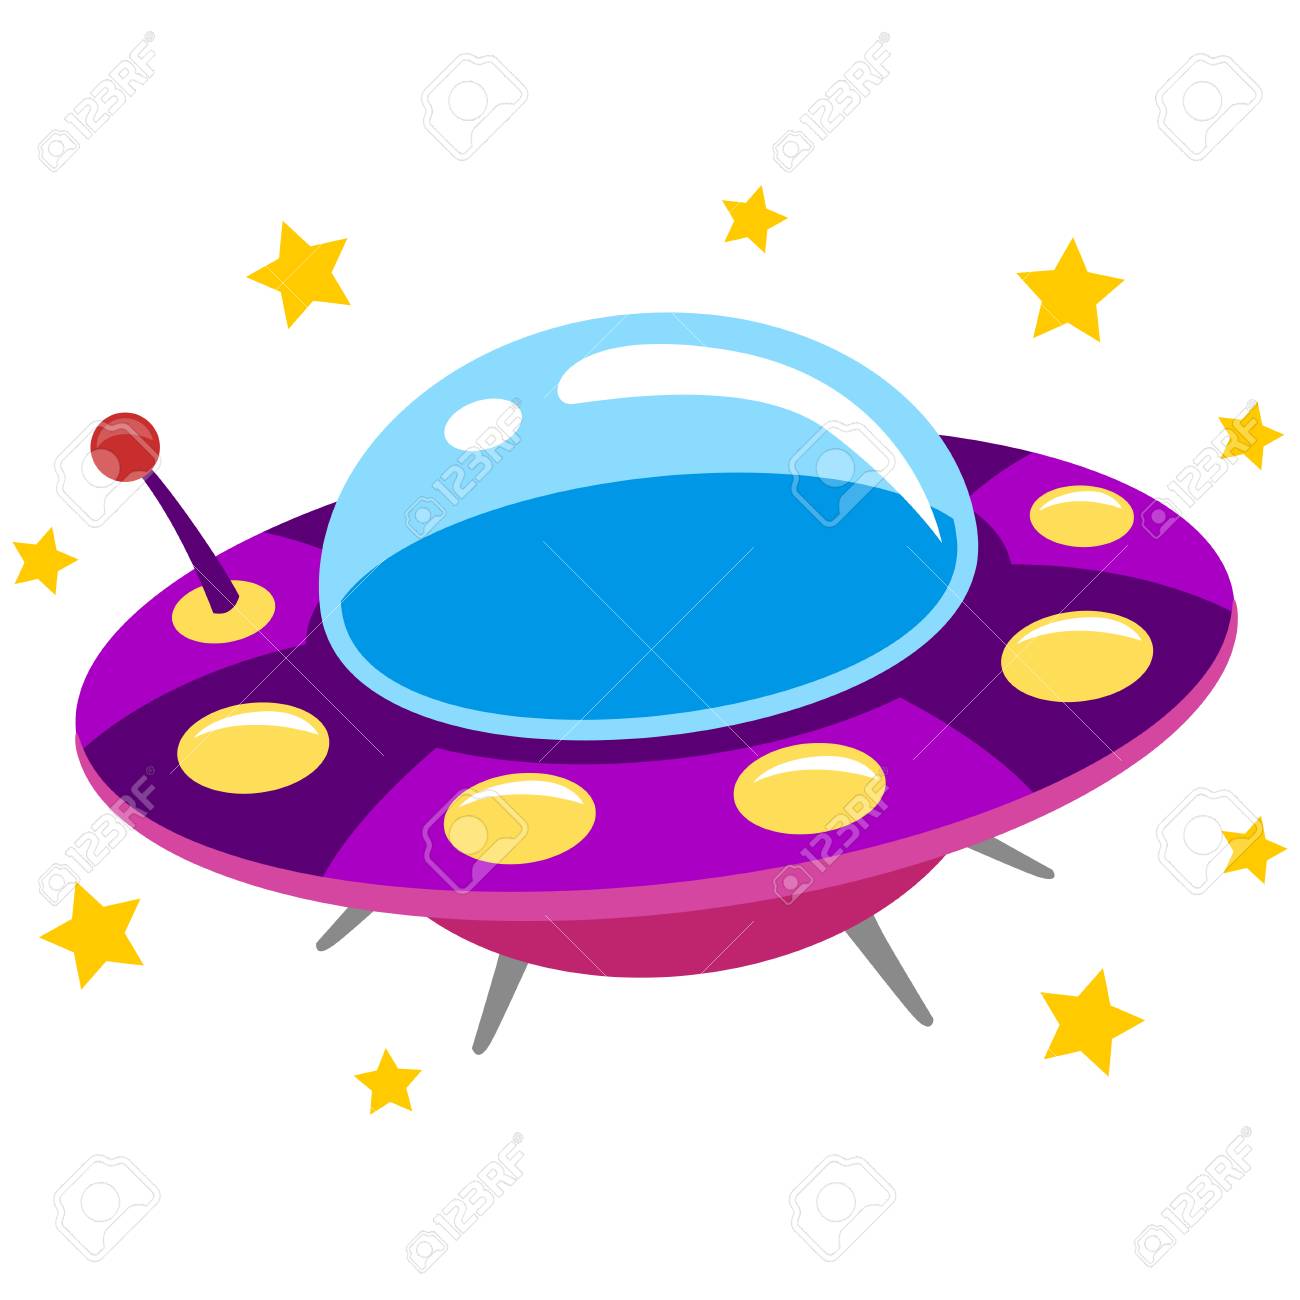 Flying saucer clipart 6 » Clipart Station.